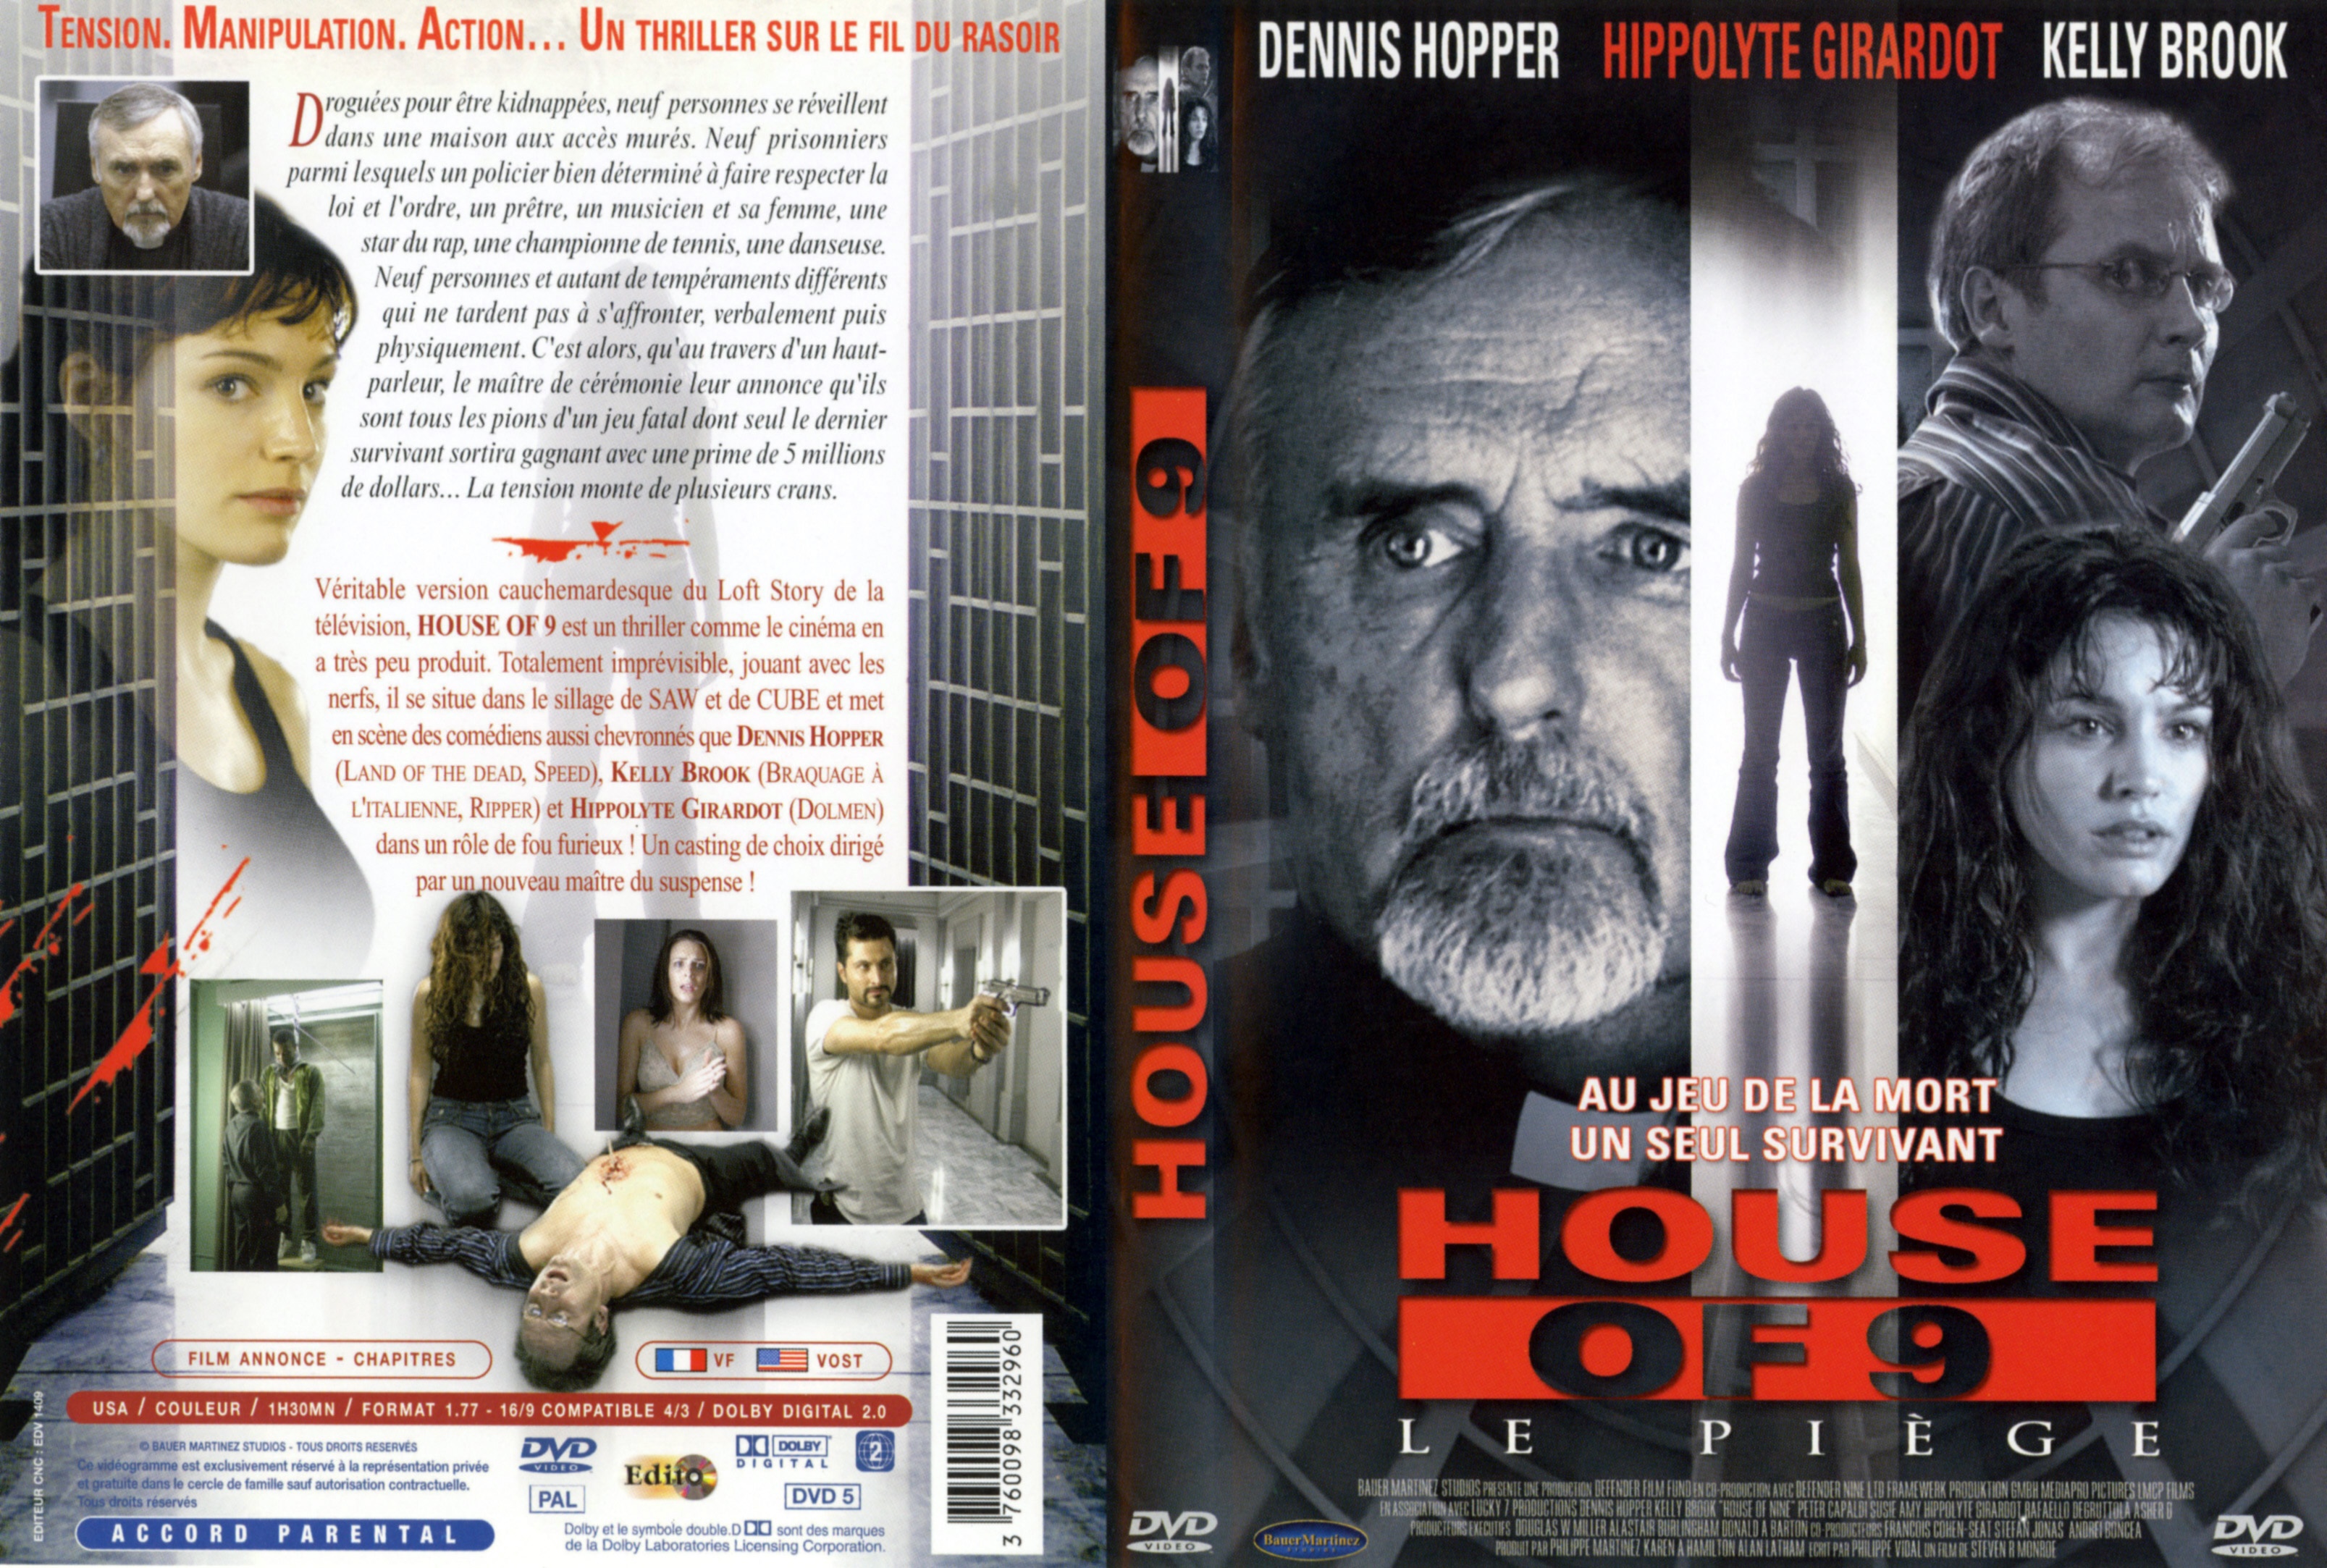 Jaquette DVD House of 9